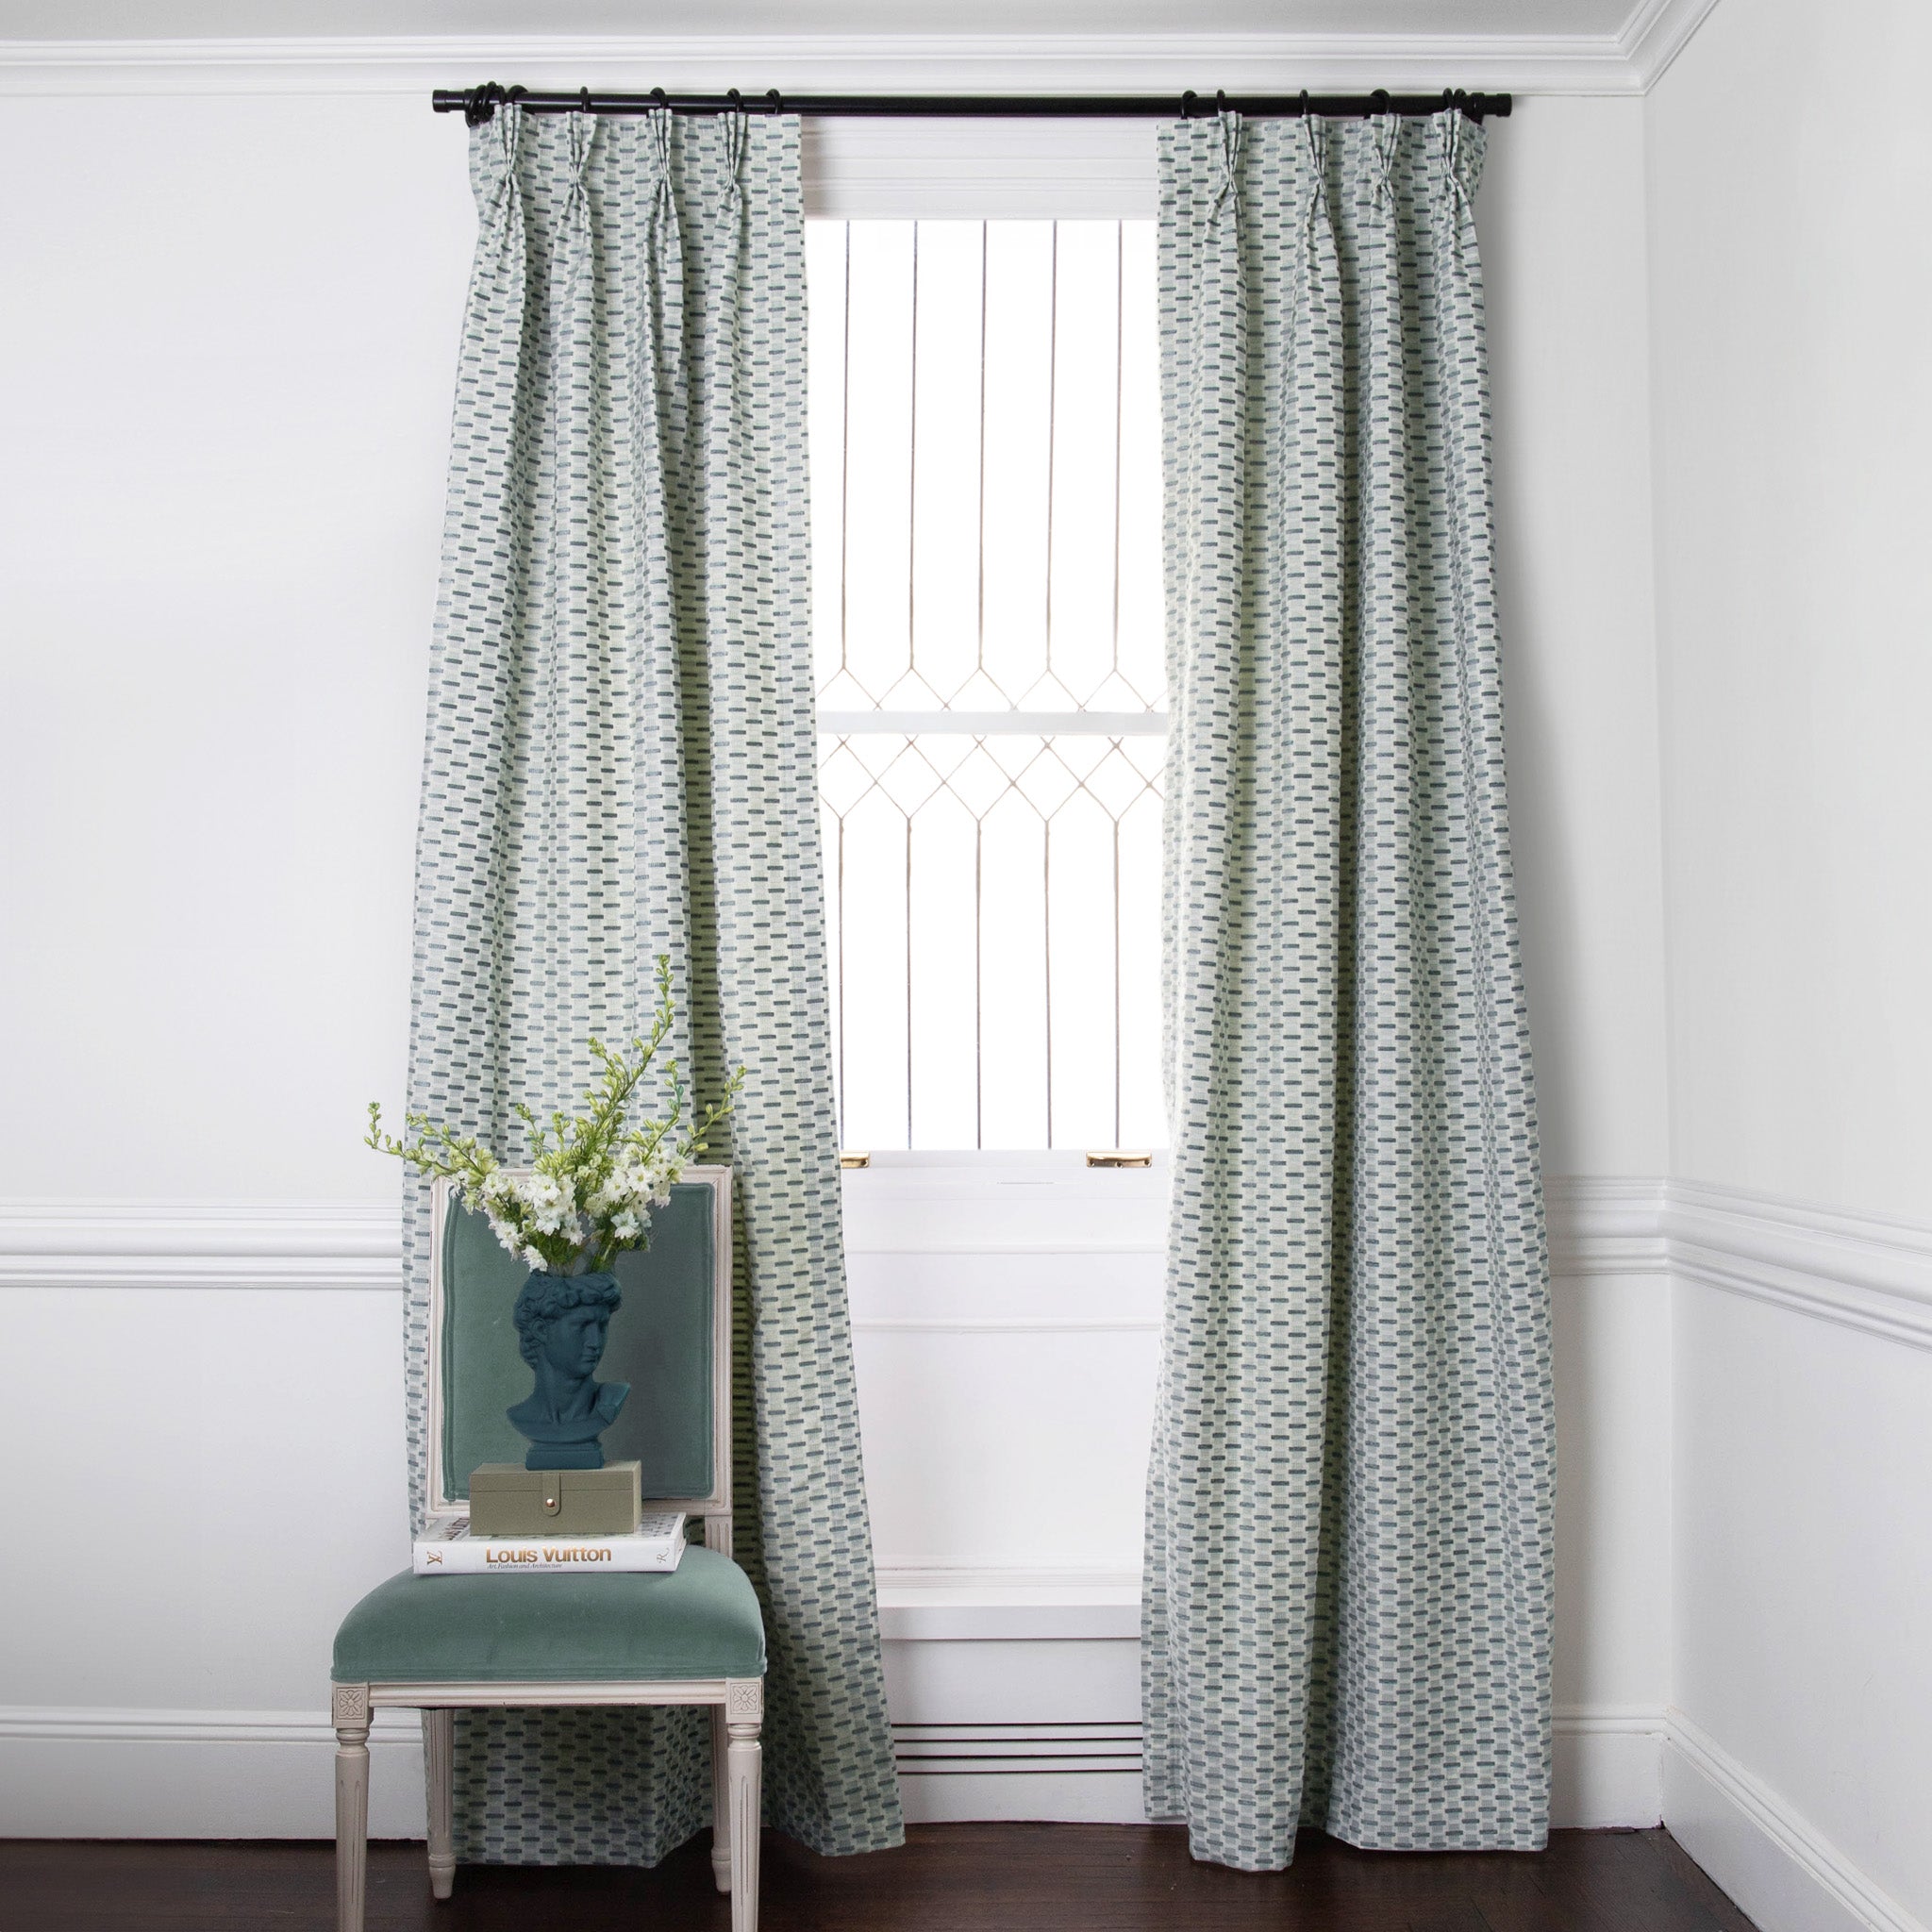 Green chenille and woven jacquard custom curtain hanging on window in room with white walls and green chair